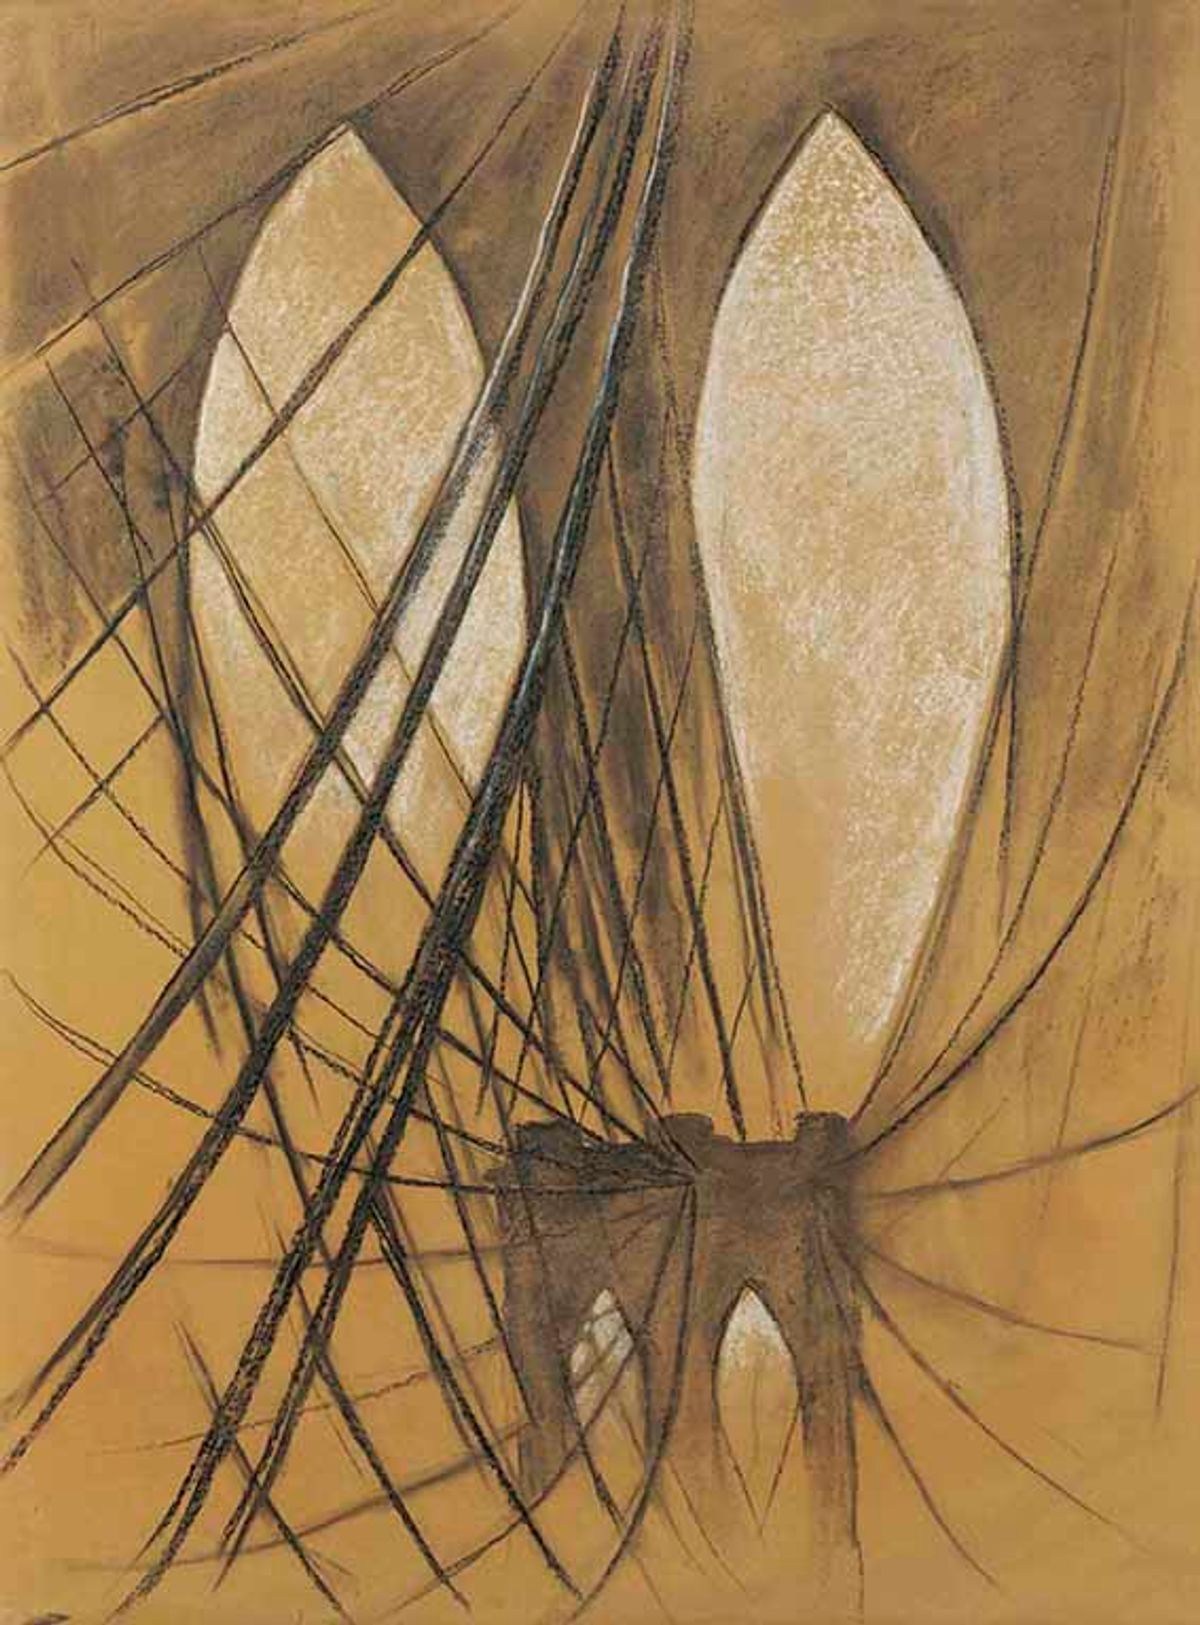 Georgia O'Keeffe's Study for Brooklyn Bridge, charcoal and black chalk on paper, 1949 © 2020 Georgia O'Keeffe Museum/Artists Rights Society (ARS), New York